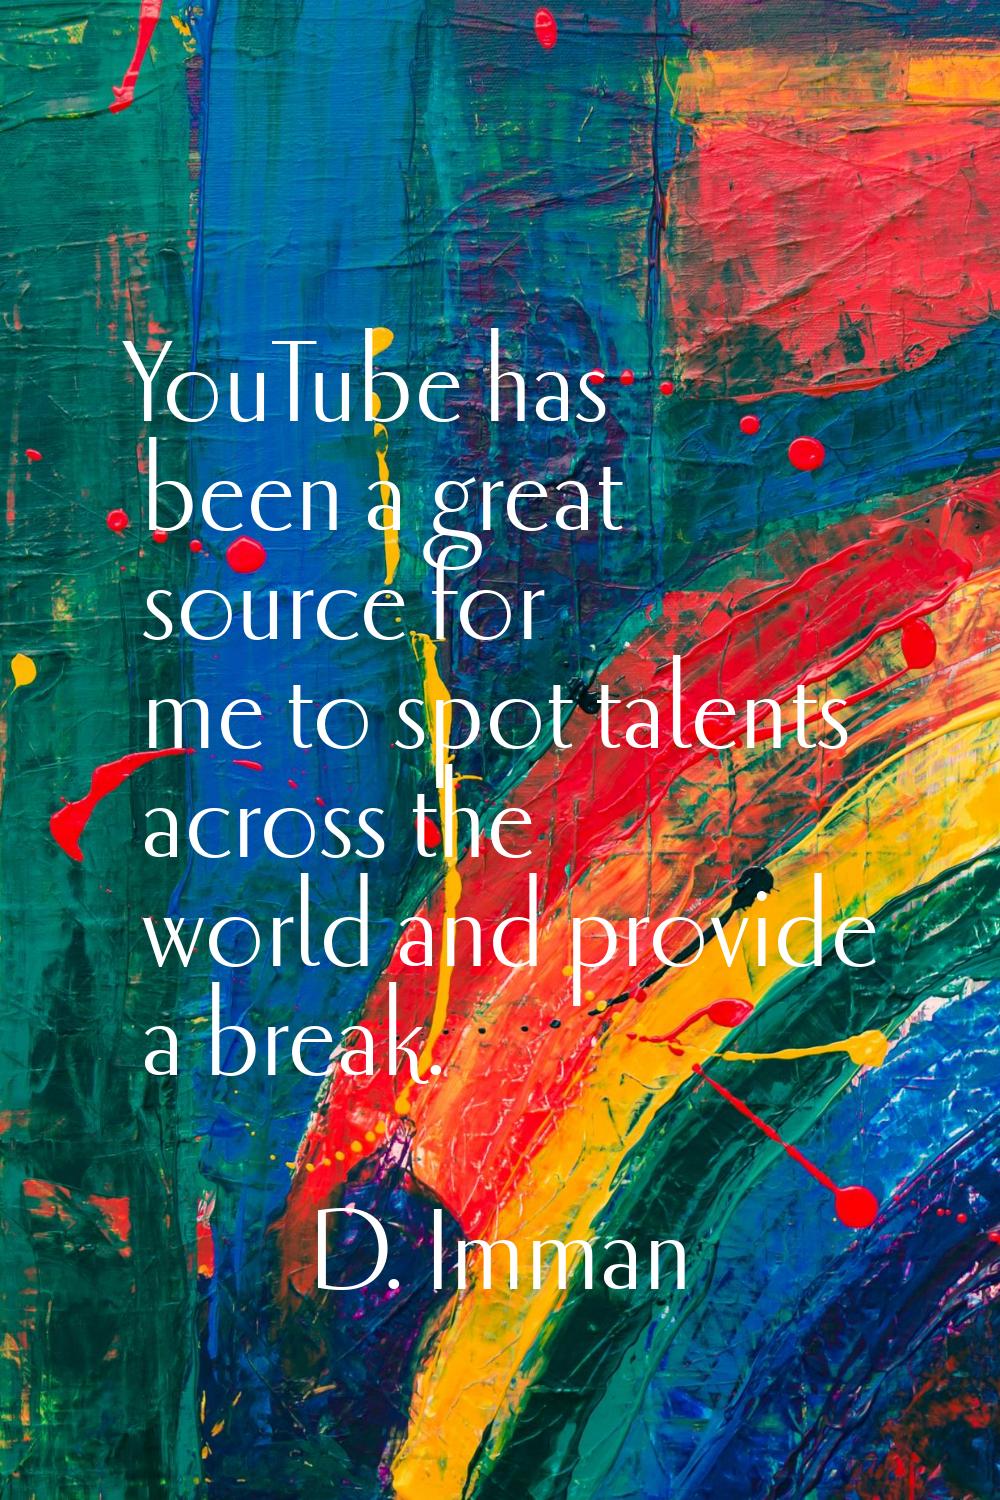 YouTube has been a great source for me to spot talents across the world and provide a break.